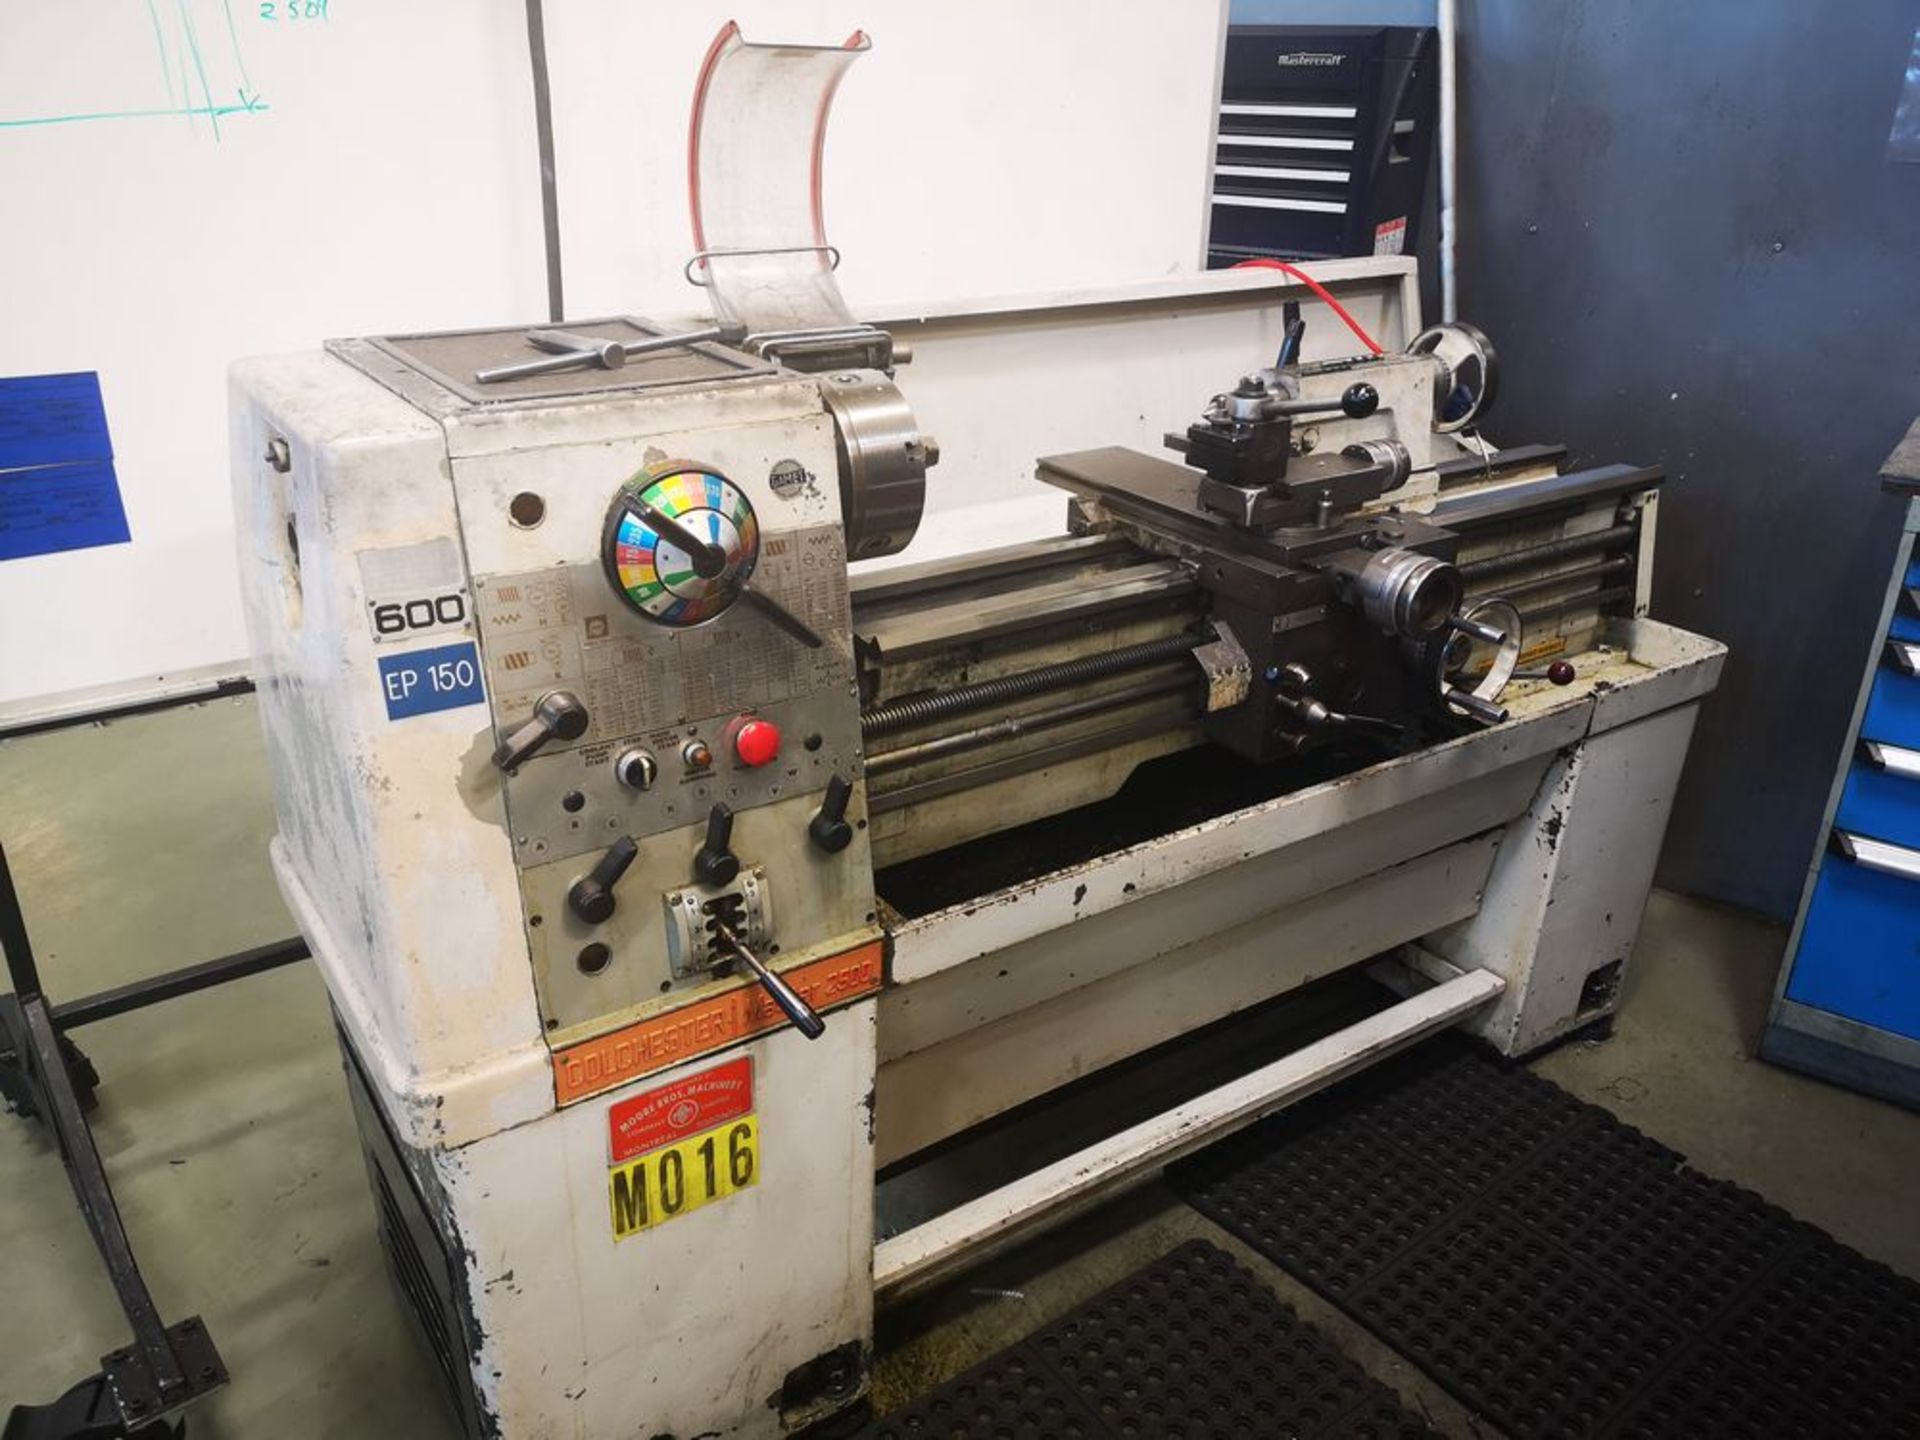 COLCHESTER Master 2500 Tool Room Lathe, s/n na, 12" Swing Over Bed, 48" Centers - Please note: